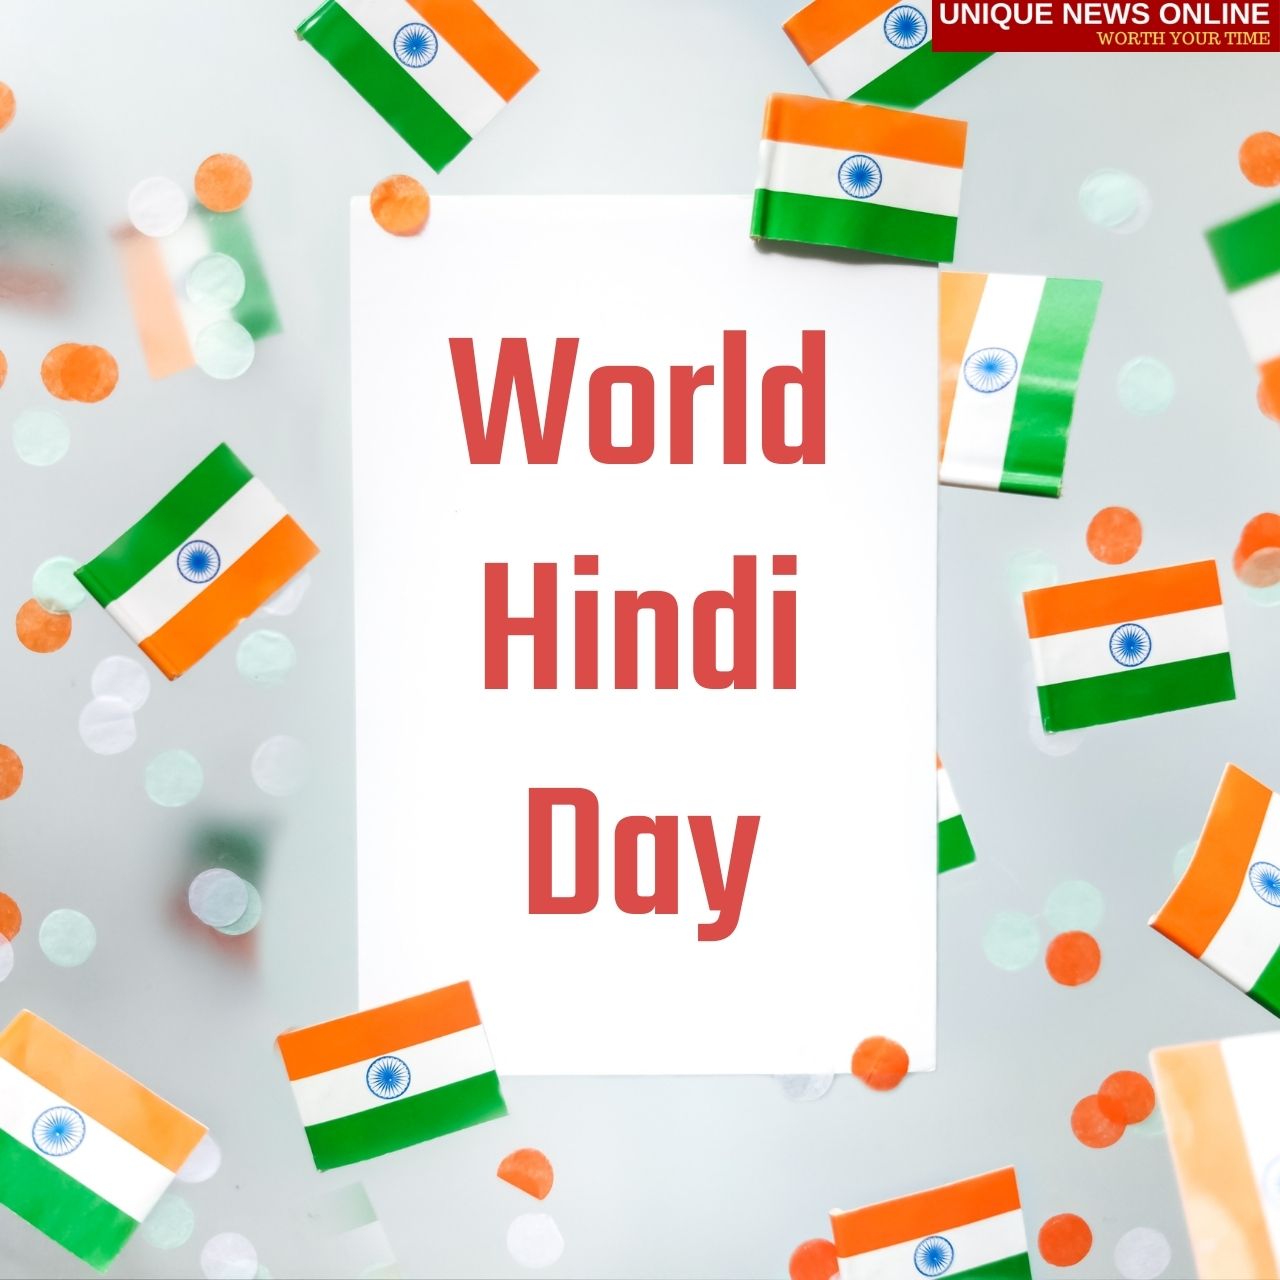 World Hindi Day 2022 Instagram Captions, Facebook Quotes, WhatsApp Messages, Posters, Drawings, Gif, Memes to share